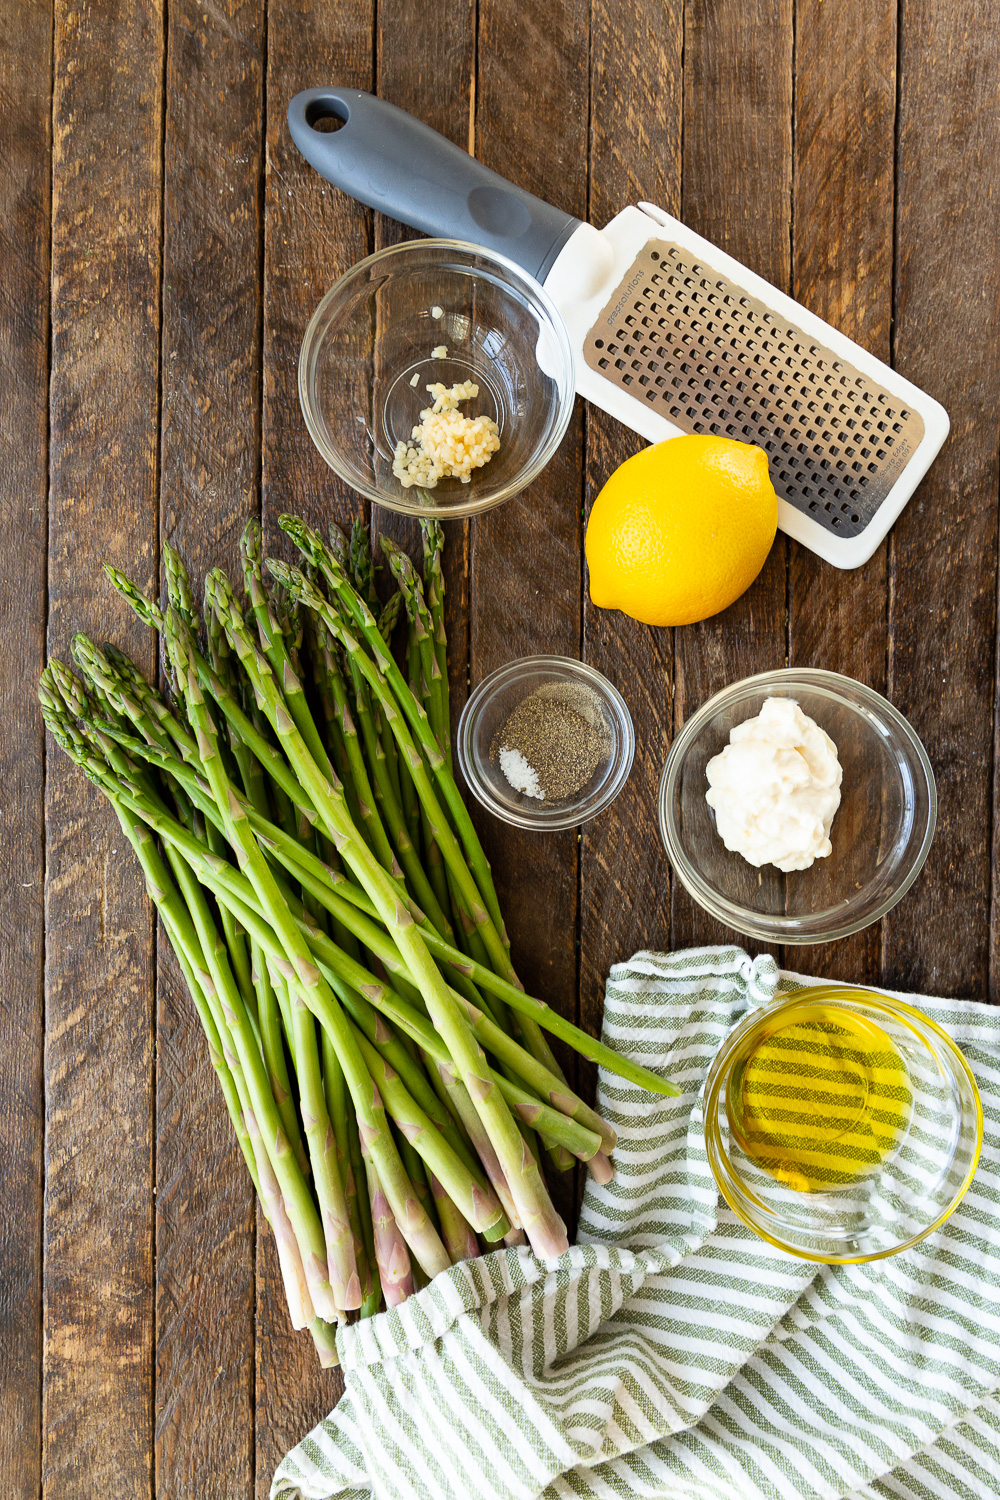 Ingredients for delicious air fryer asparagus